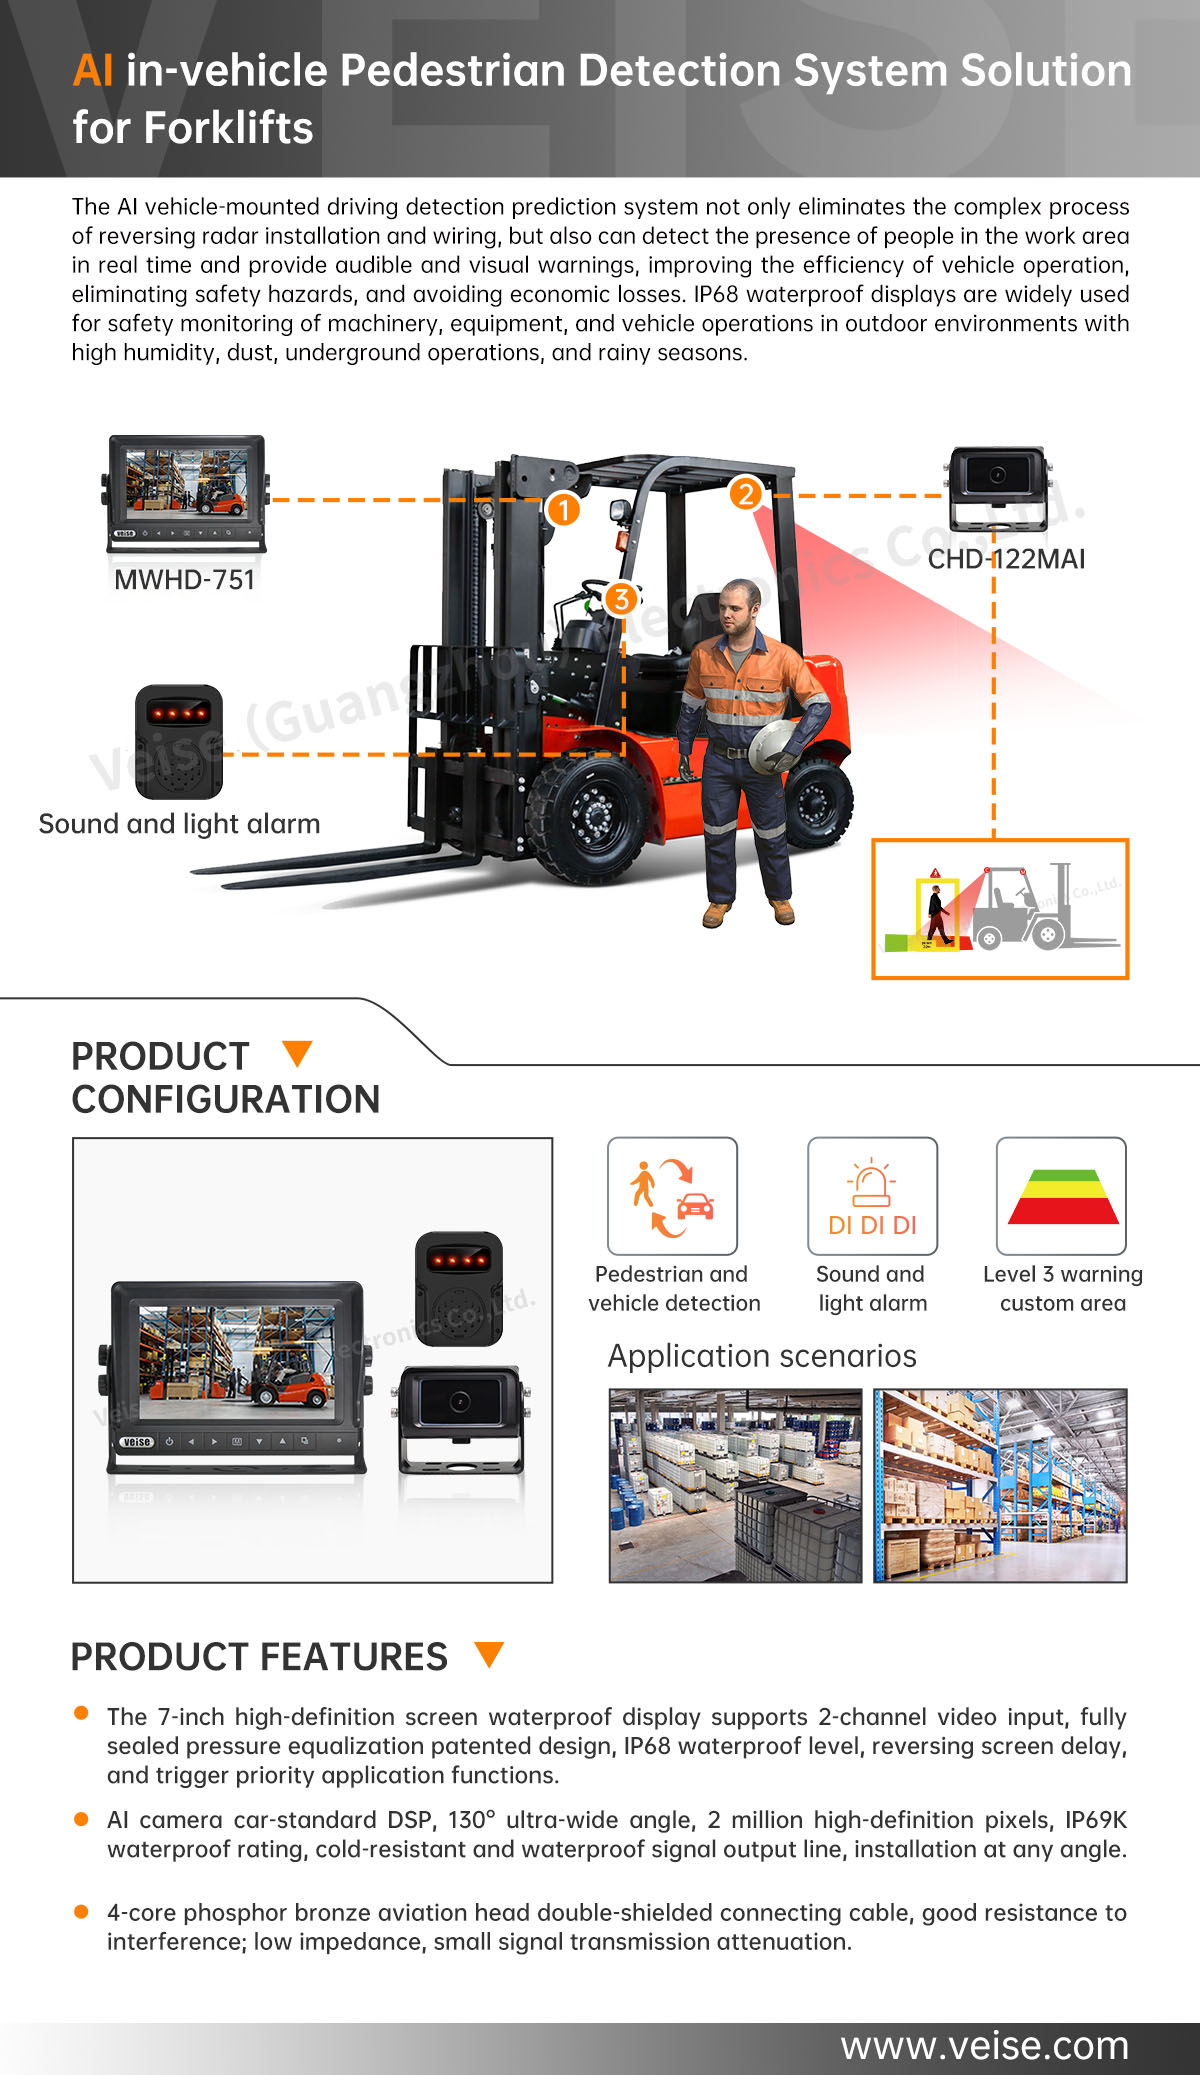 AI in-vehicle Pedestrian Detection System Solutions for Forklifts